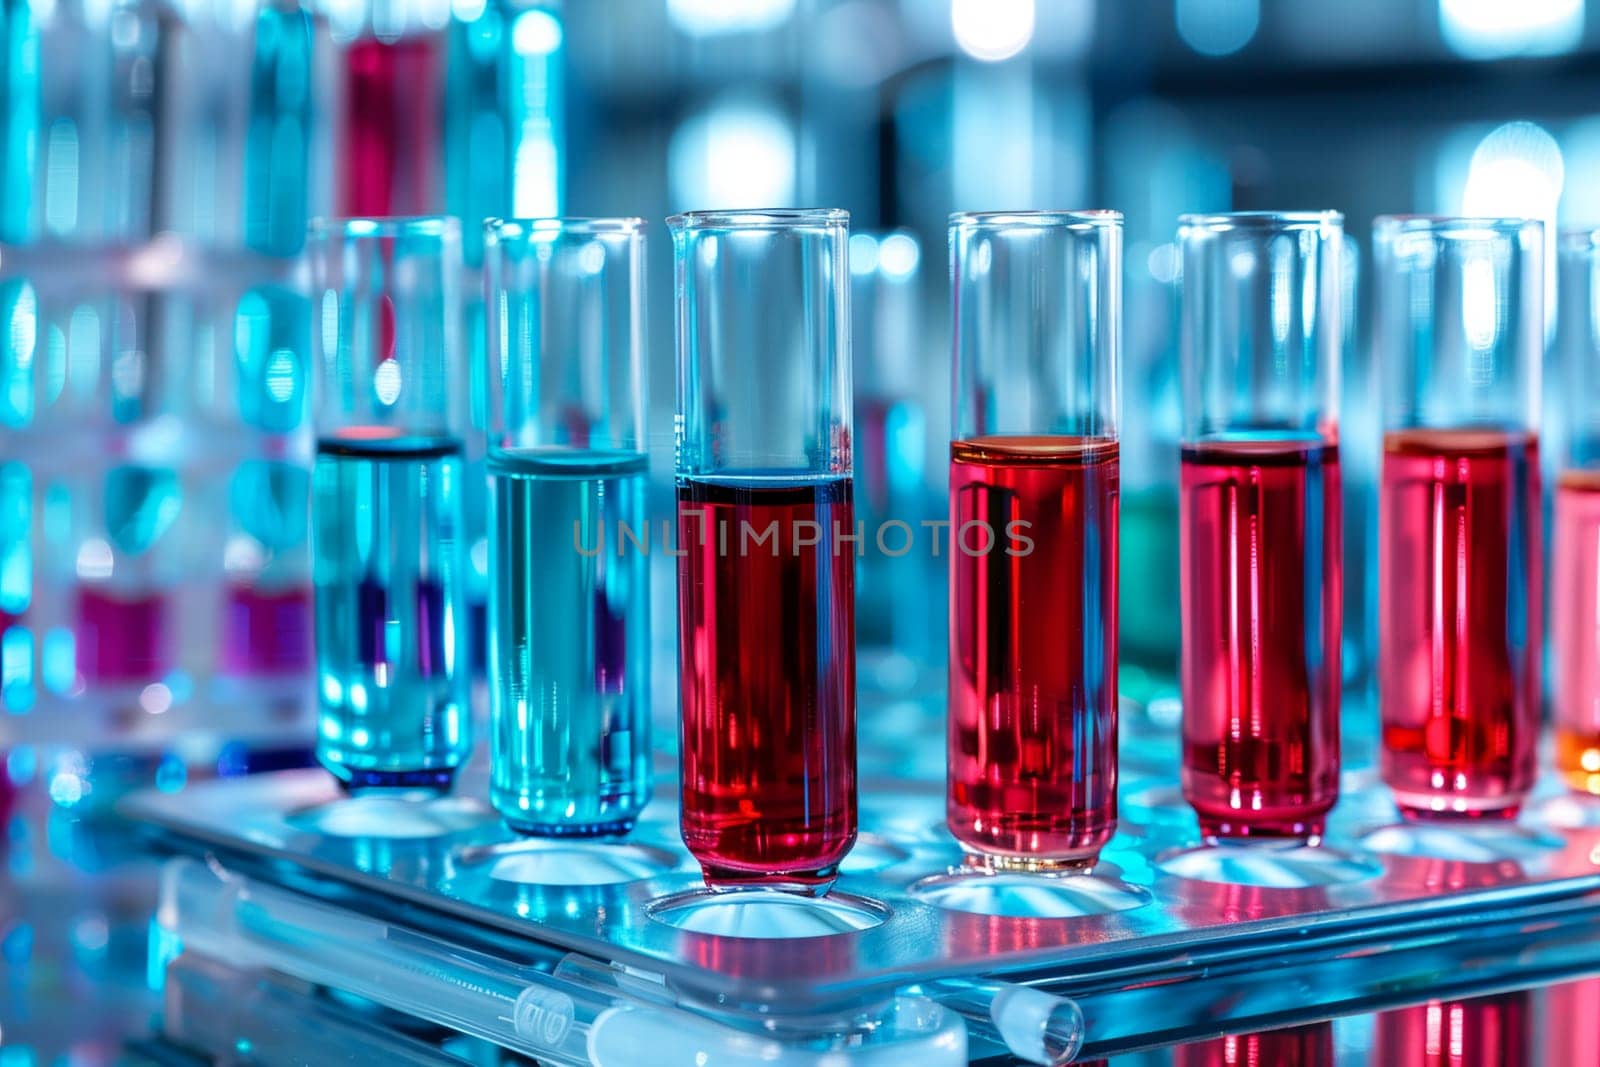 A scientific laboratory setting with multiple blood samples contained in test tubes, representing medical research and testing.